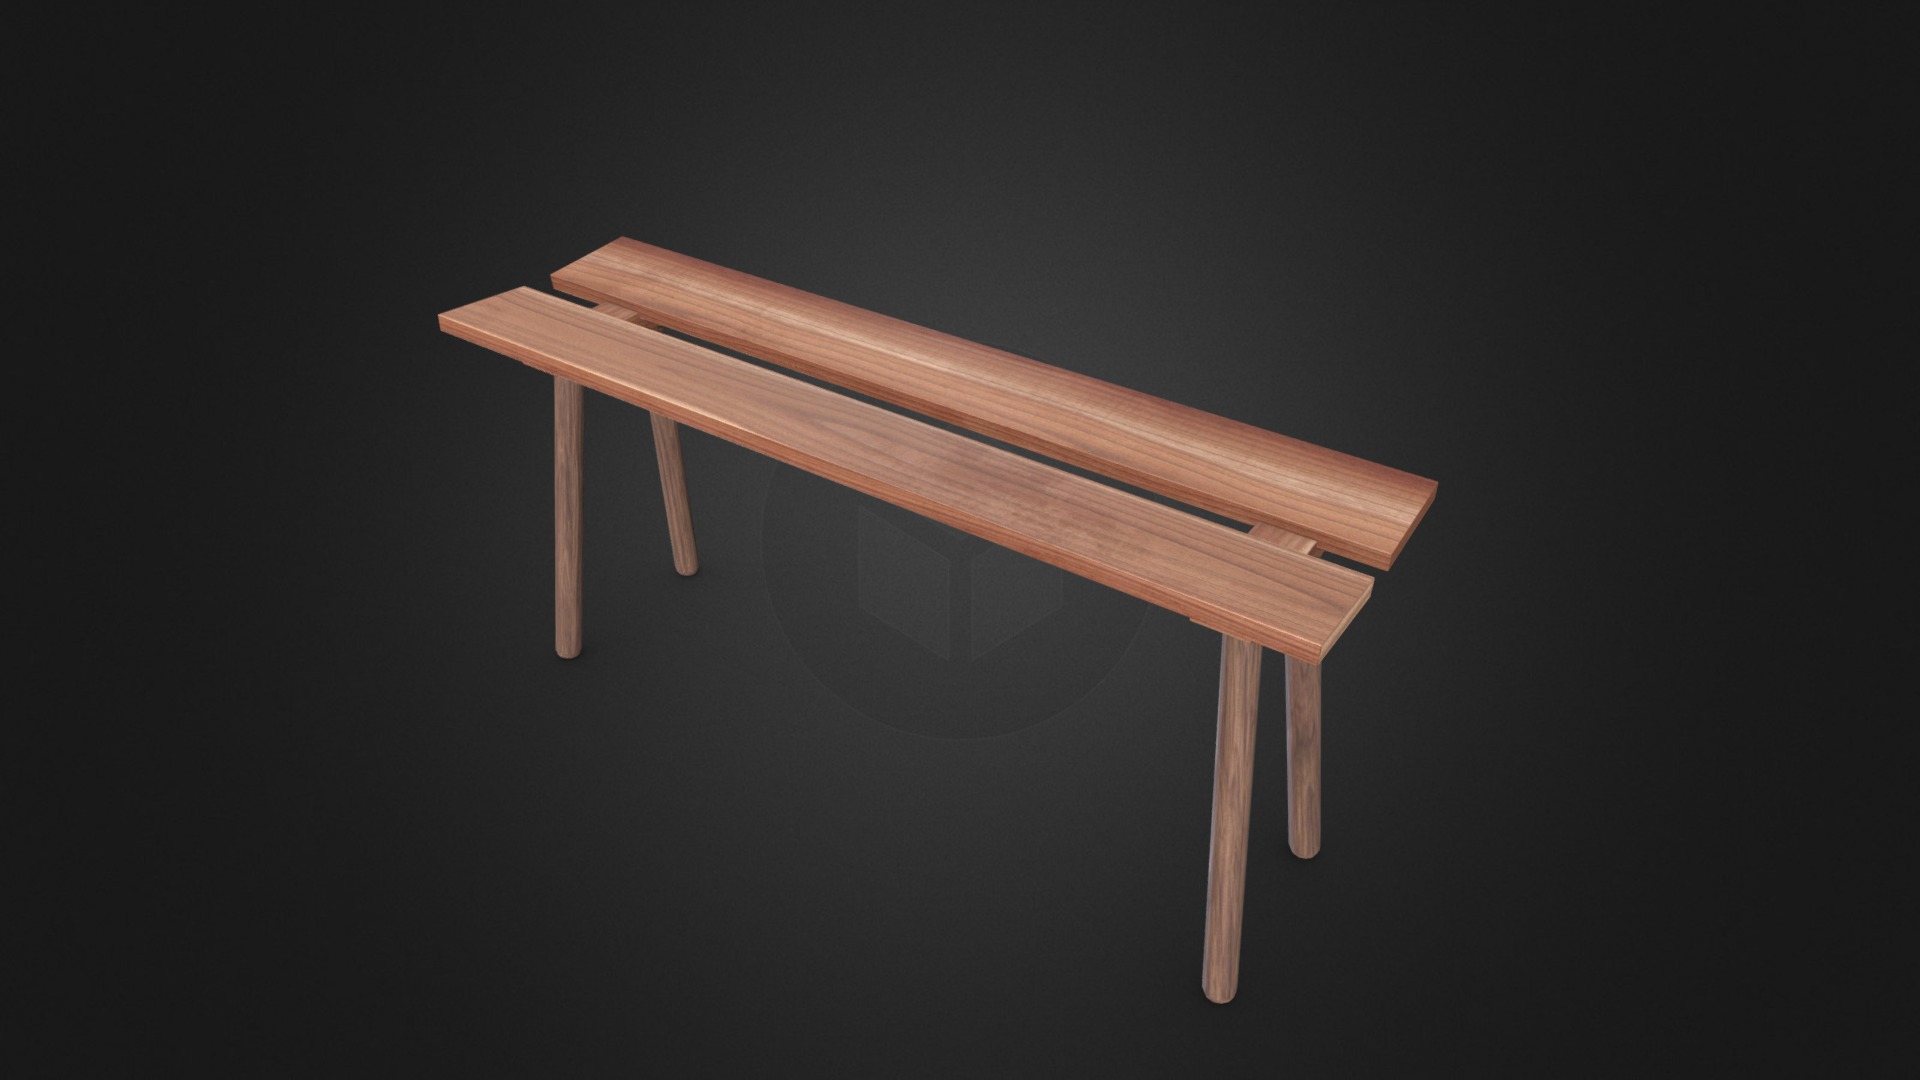 3D model Sitting Bench for Garden or Park - This is a 3D model of the Sitting Bench for Garden or Park. The 3D model is about a wooden table with a glass top.